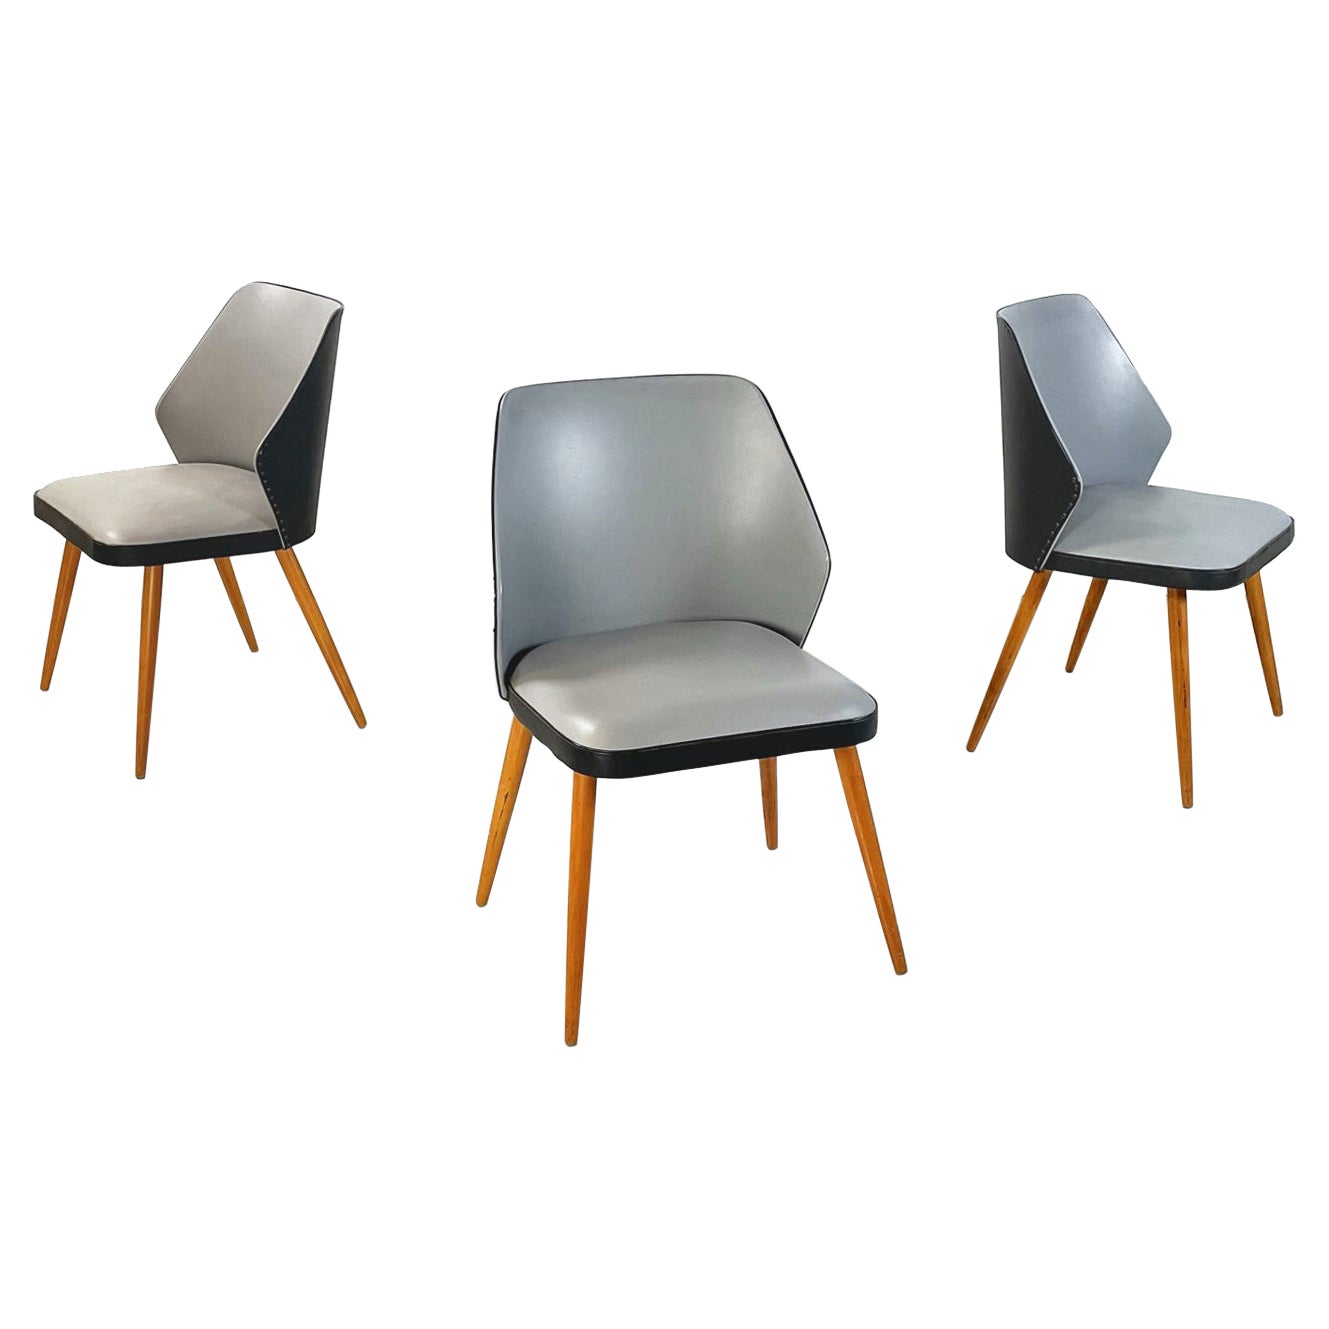 Italian modern Chairs in black and gray leather and wood, 1980s For Sale